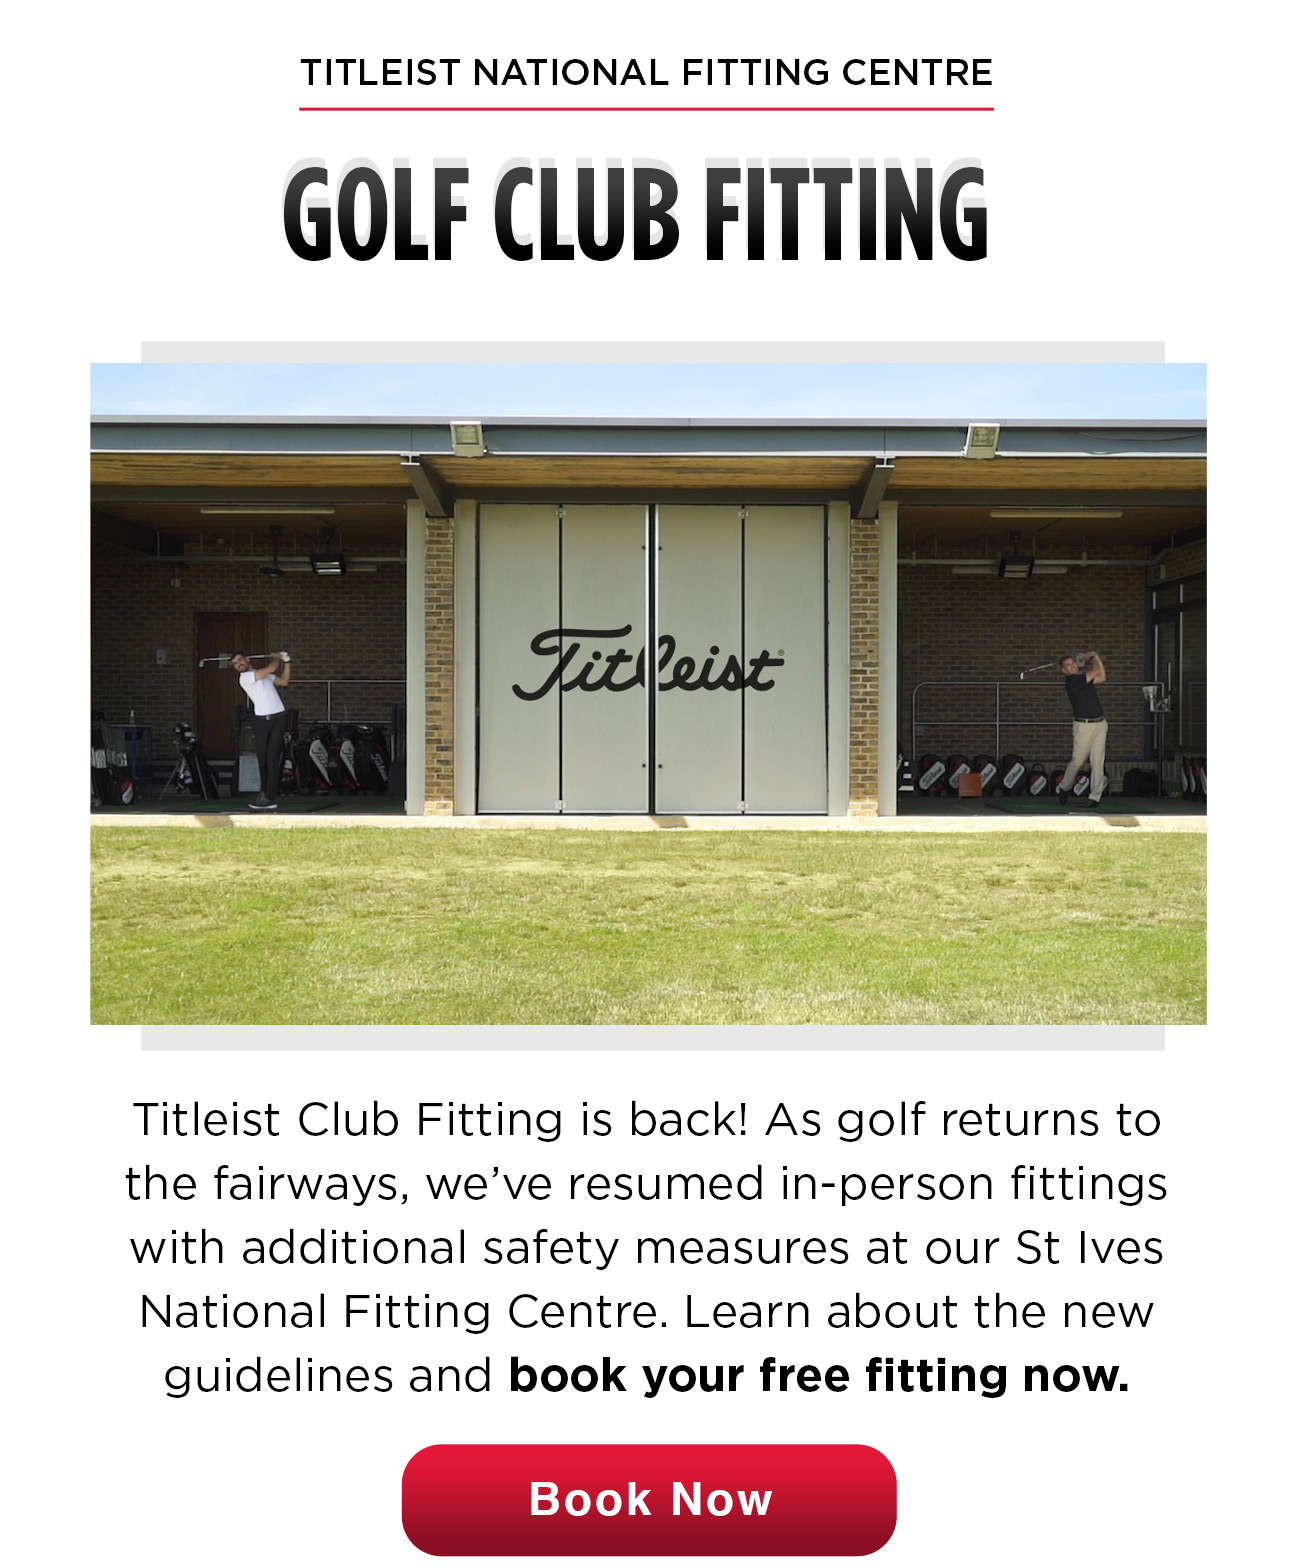 St Ives National Fitting Centre